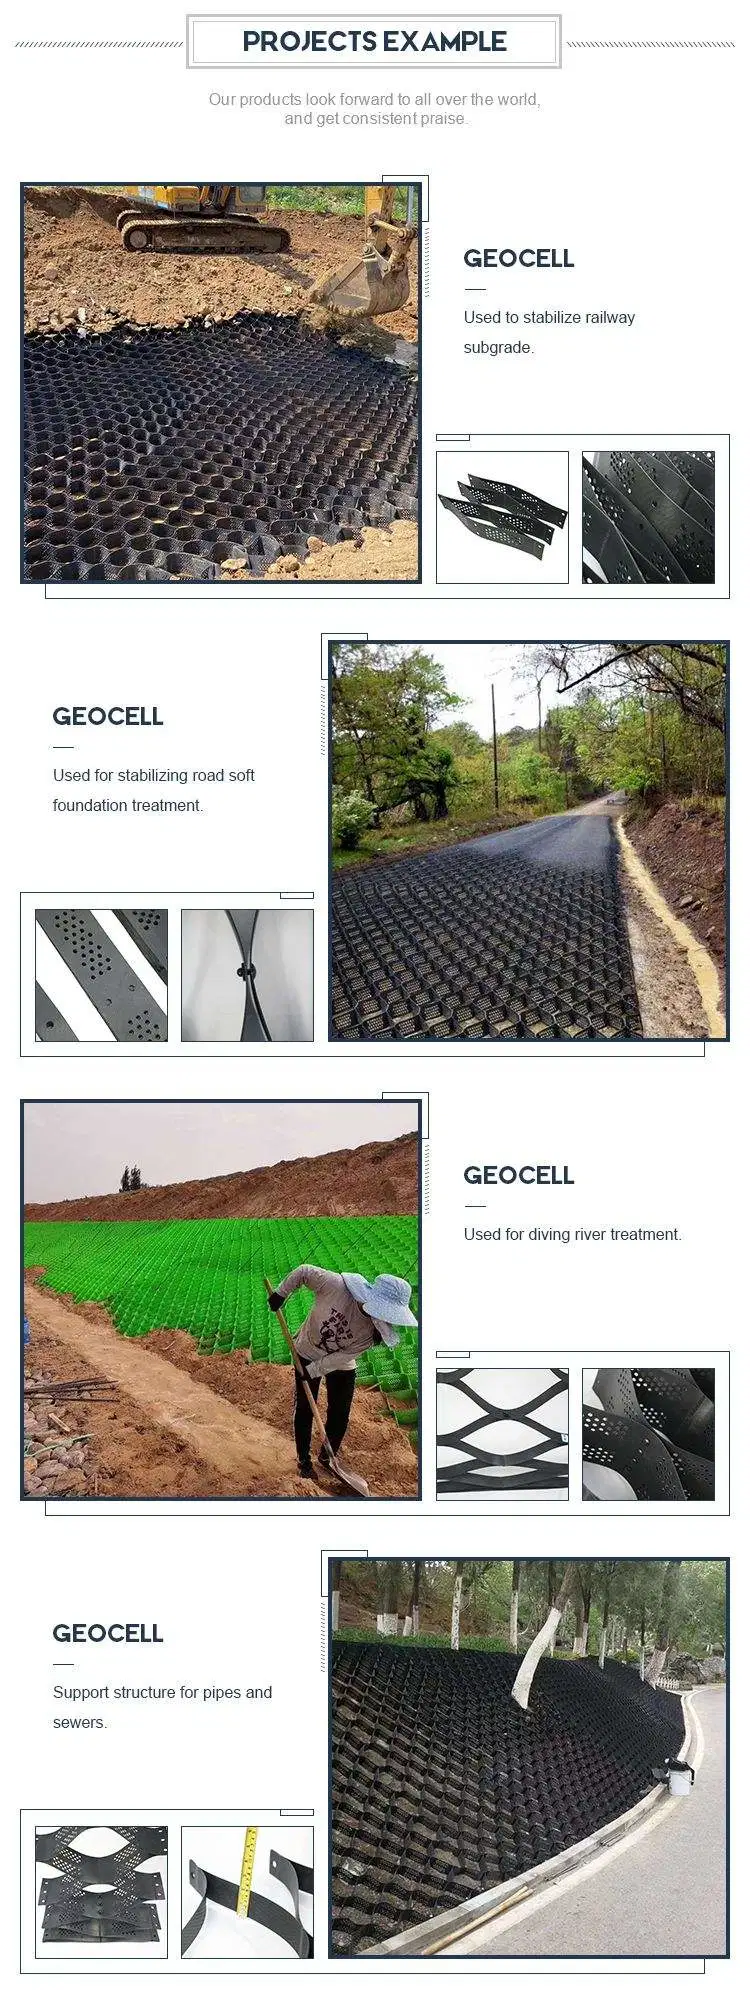 Geocell Geotextile Honeycomb Gravel Stabilize Products for Driveway Walkway Road